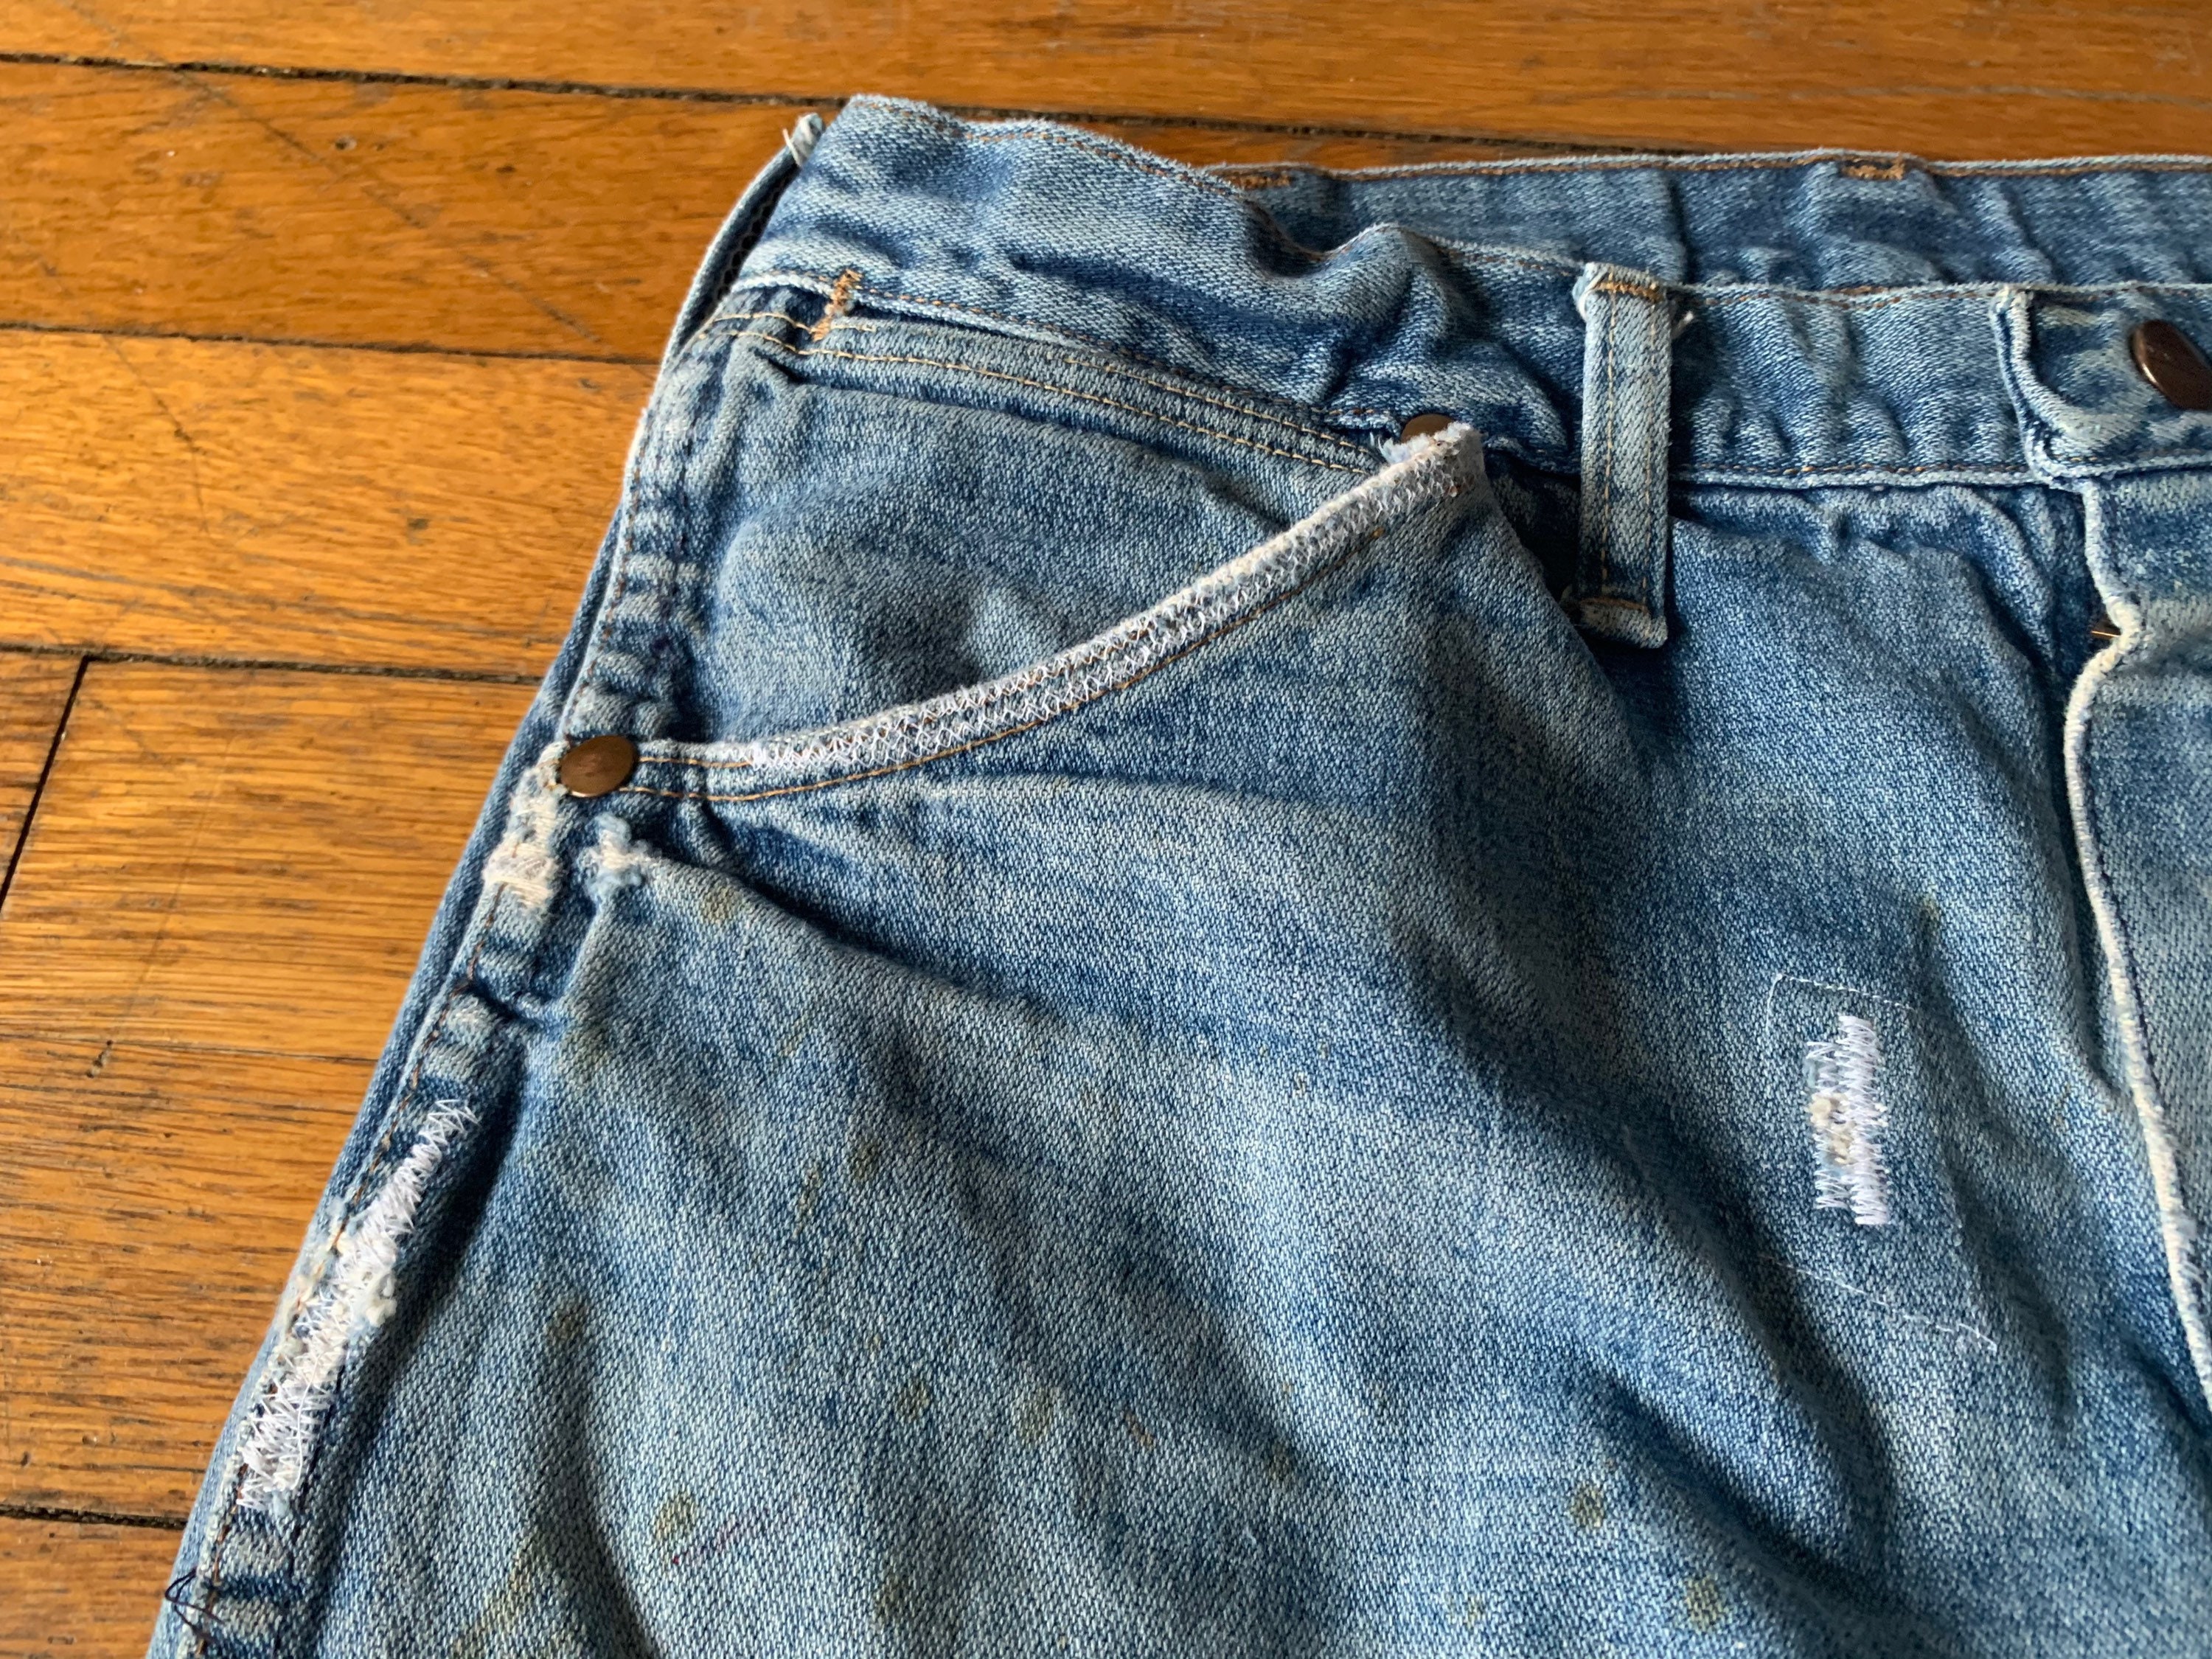 70s Maverick Heavily Distressed and Repaired Denim Blue Jeans - Etsy